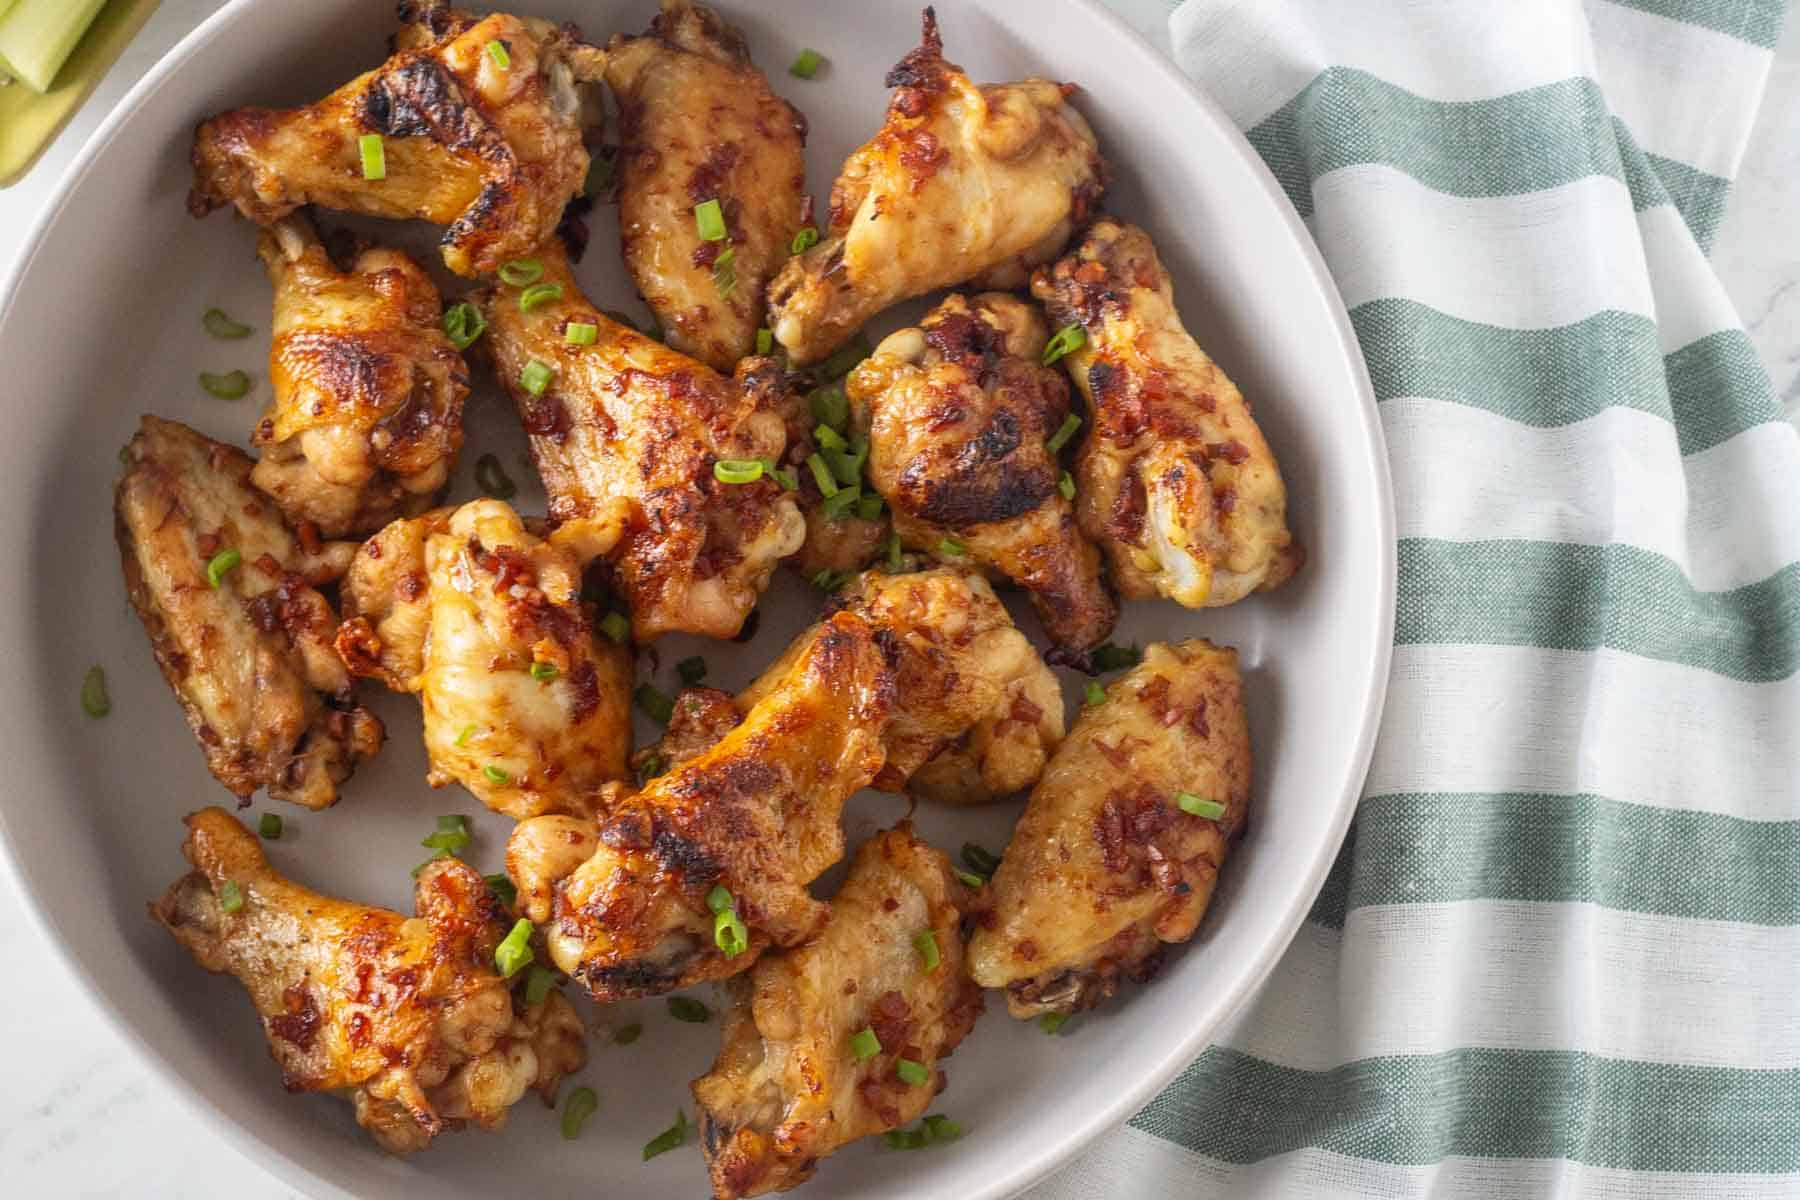 A plate of chicken wings garnished with chopped green onions.